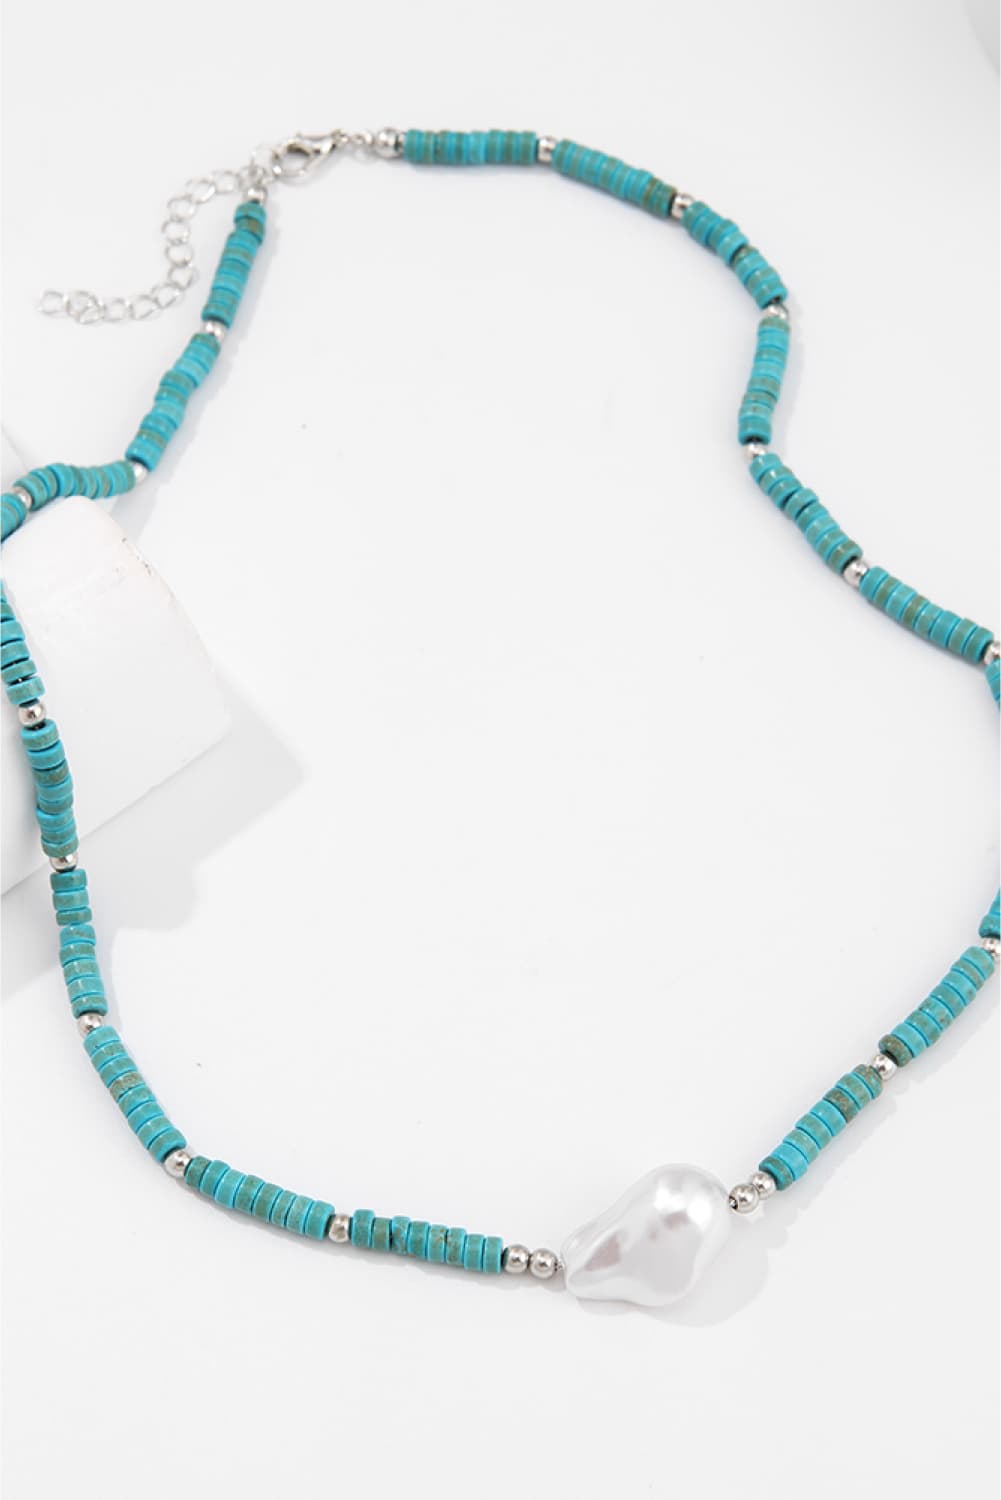 White Smoke Turquoise & Pearl Necklace Sentient Beauty Fashions jewelry